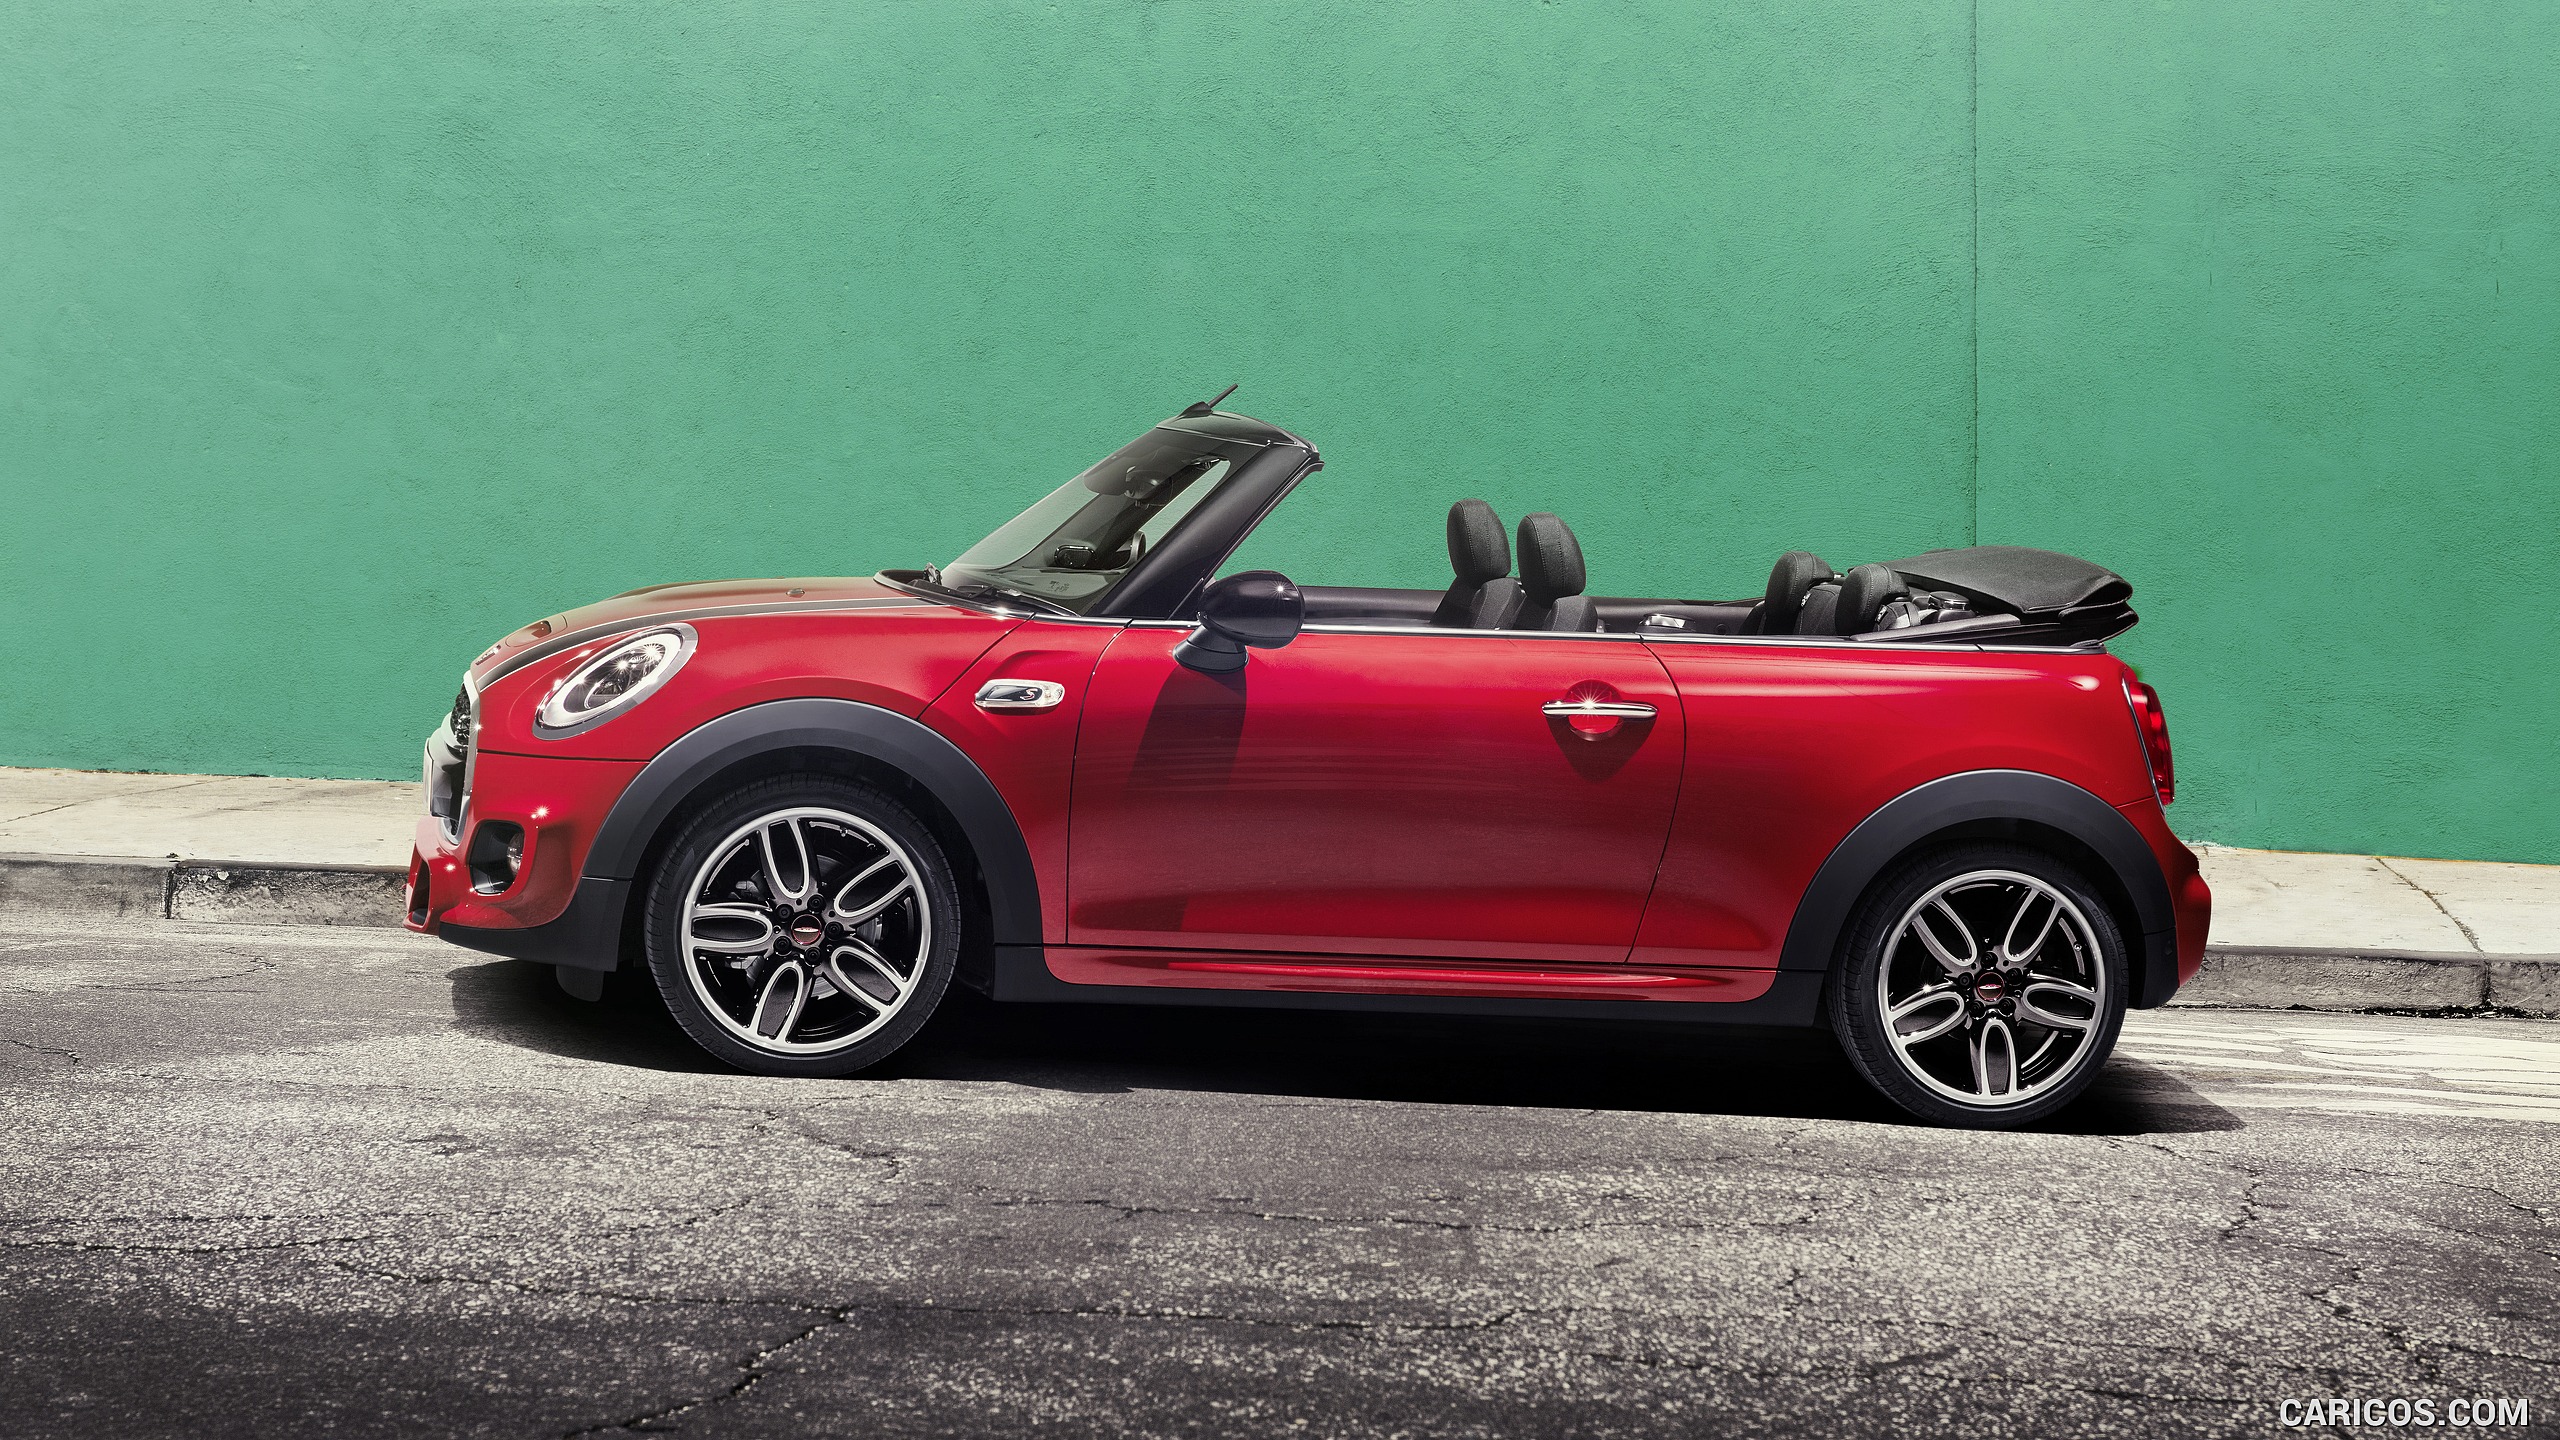 2016 MINI Cooper S Convertible with John Cooper Works Exterior package (Color: Chili Red), #6 of 147